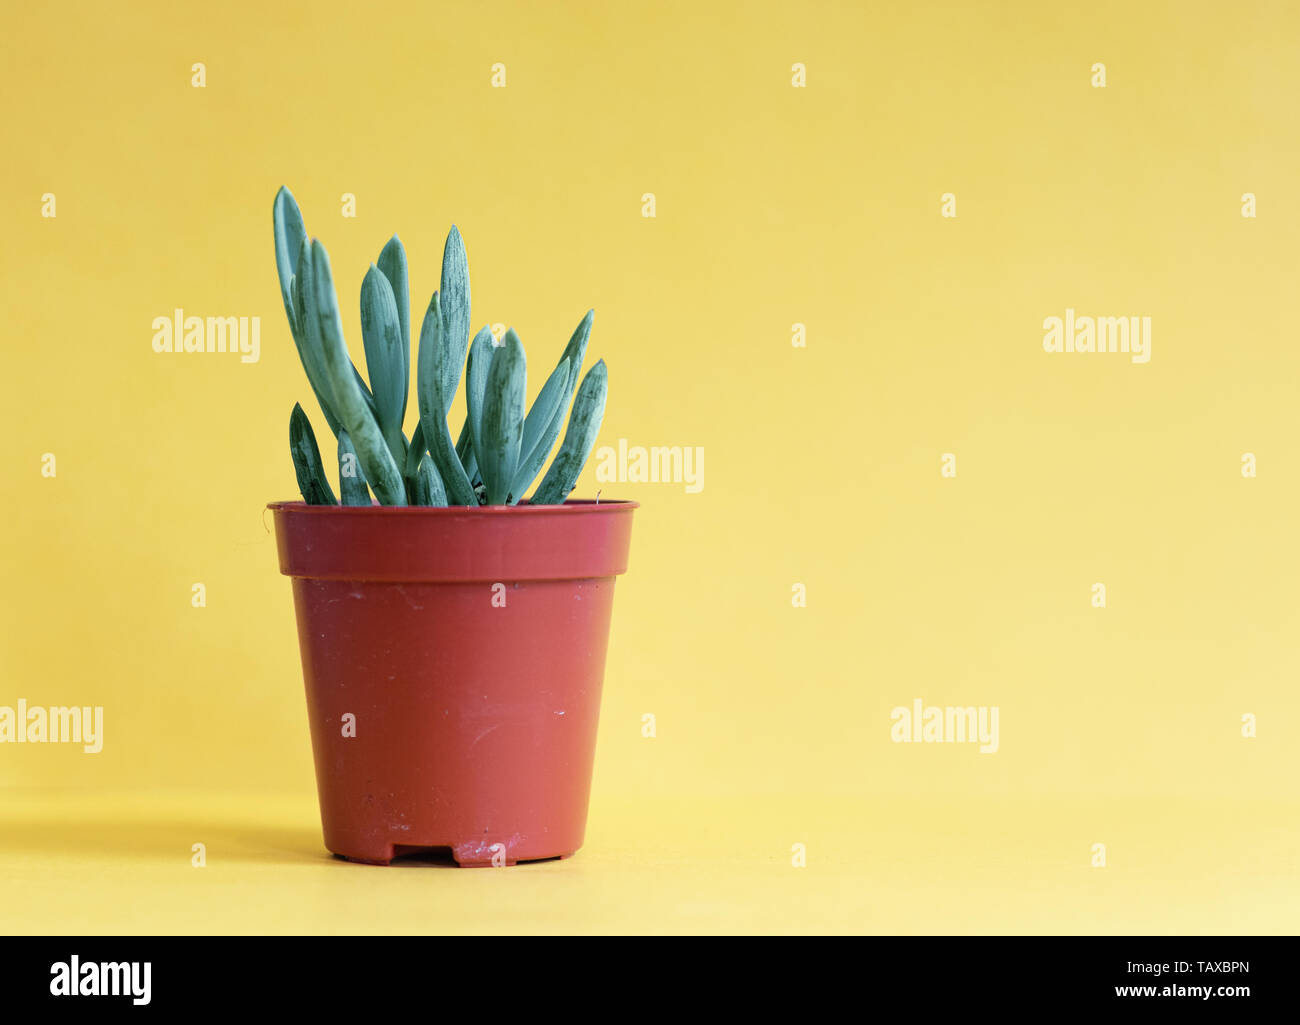 Succulent plant on a yellow background, with copy space Stock Photo